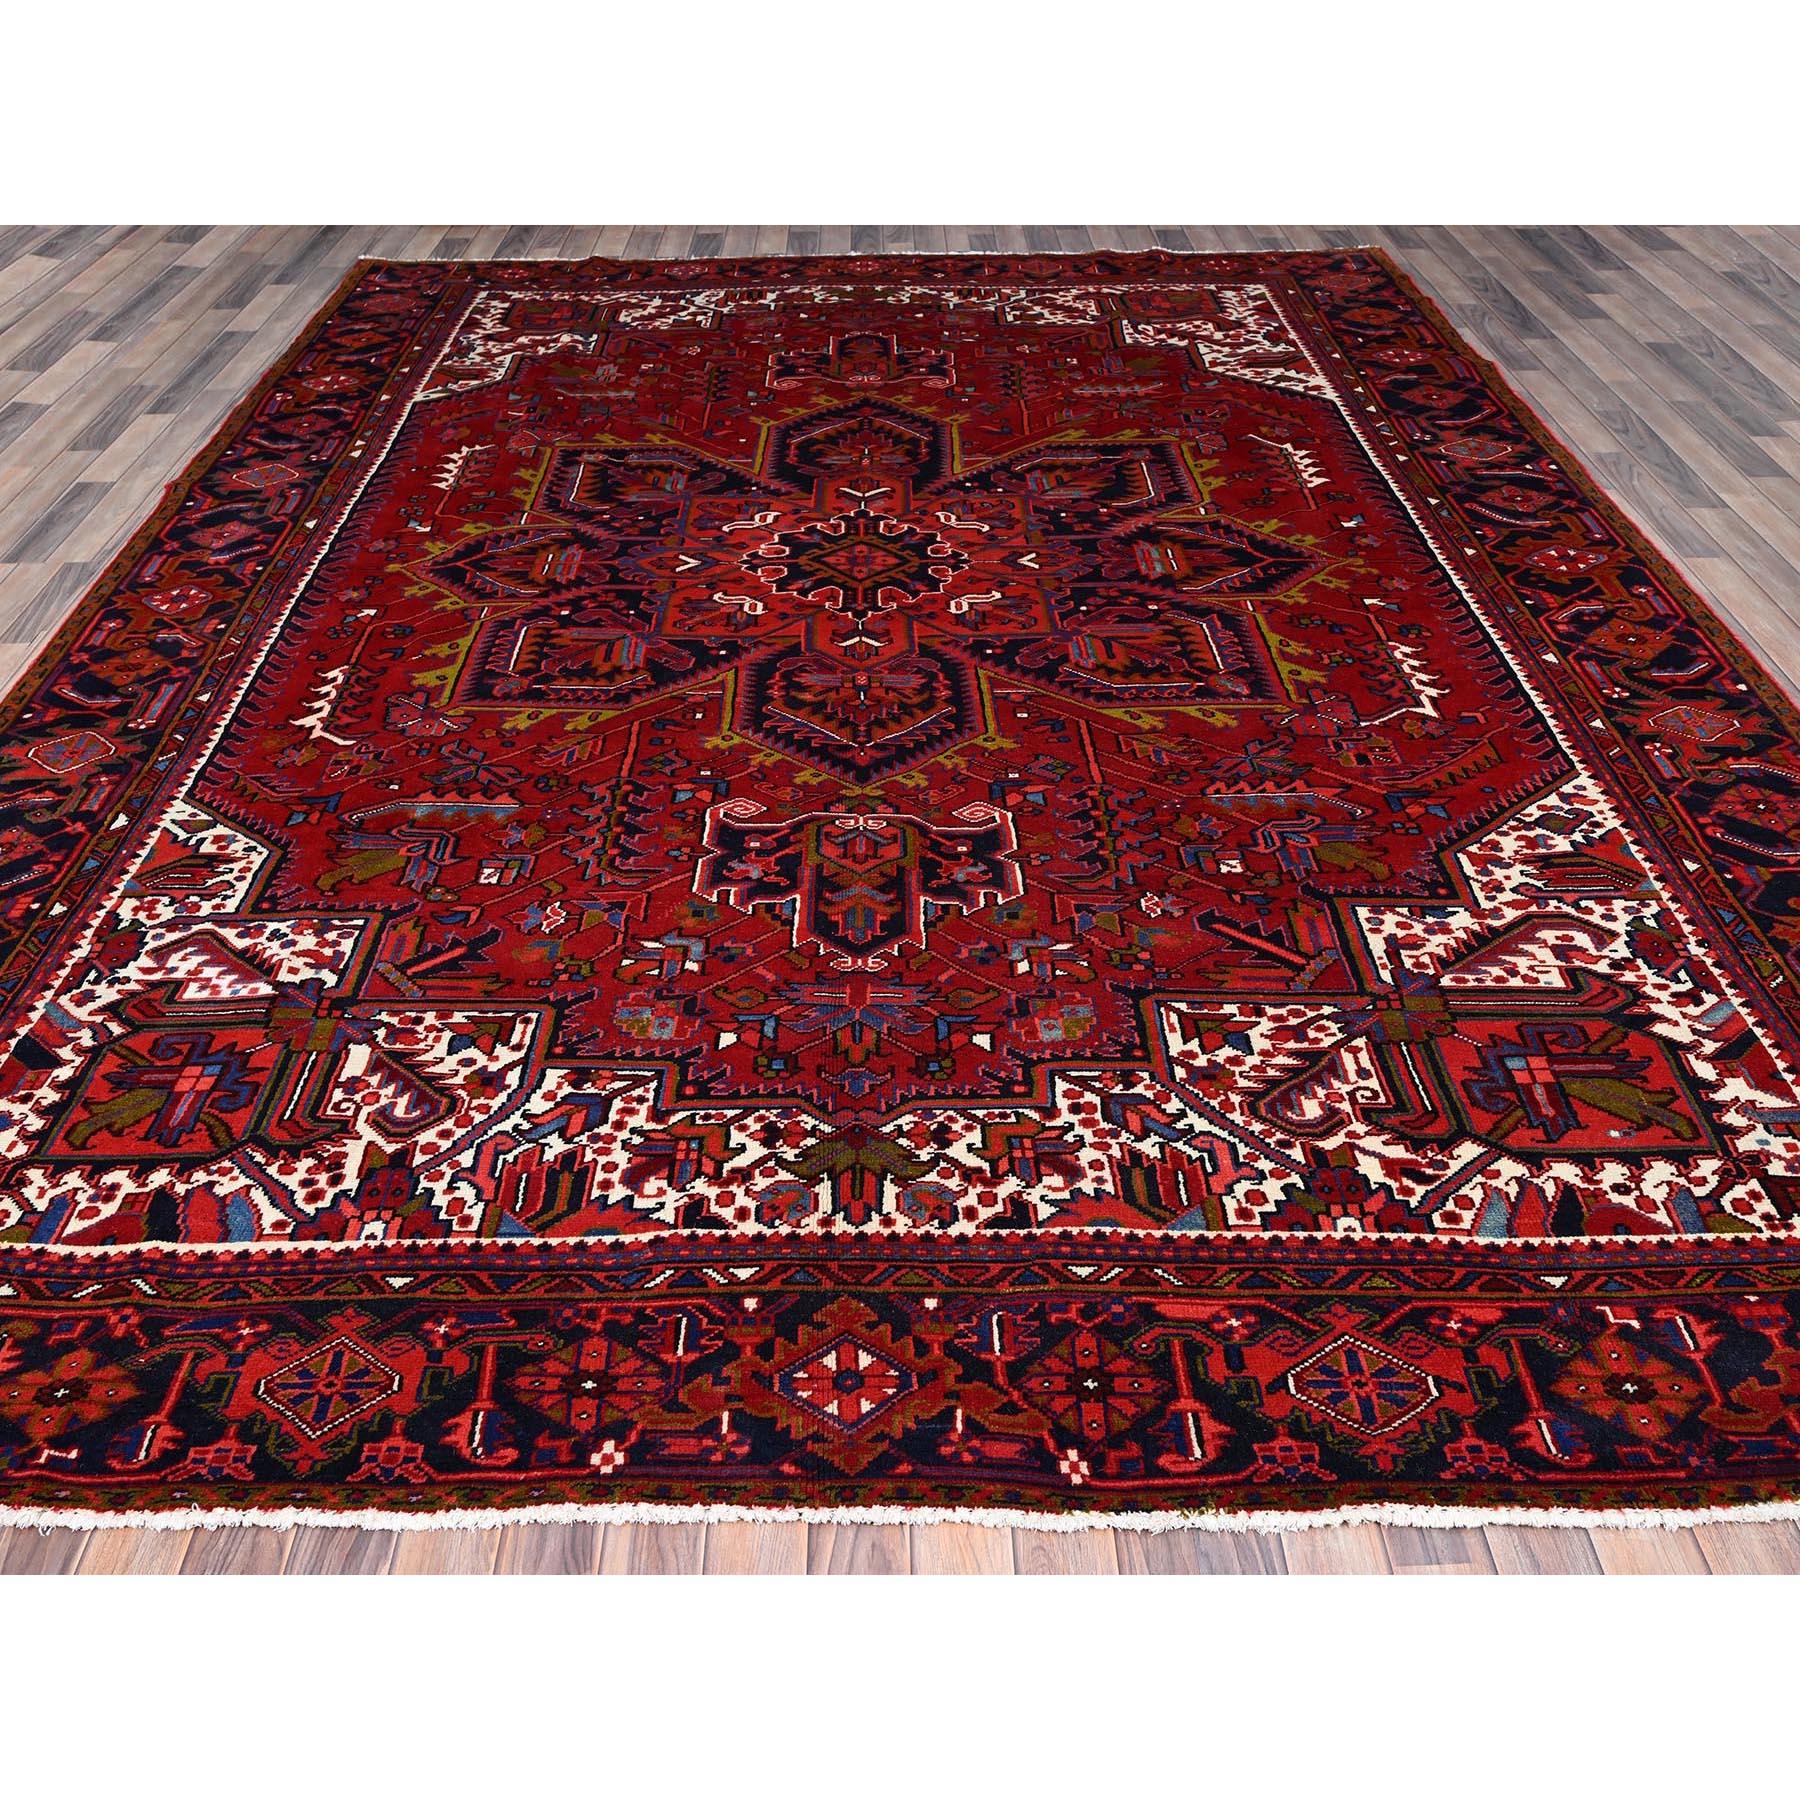 Medieval Red Hand Knotted Wool Vintage Distressed Look Persian Heriz Tribal Ambience Rug For Sale